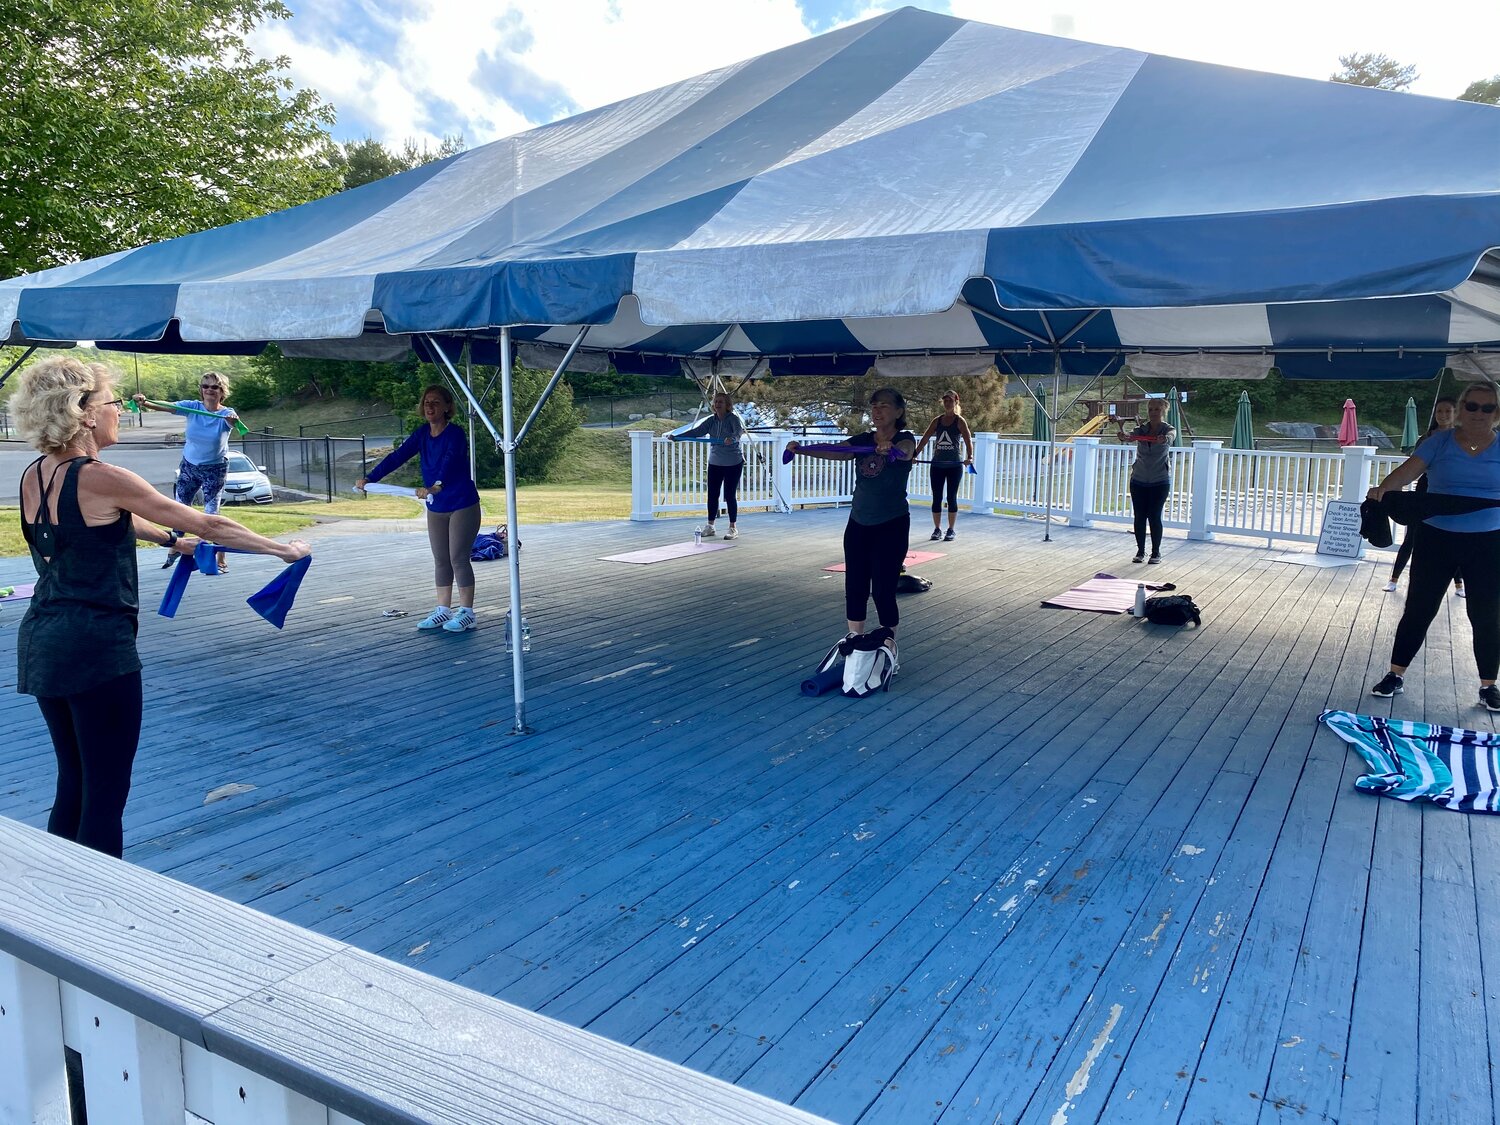 Last week the MAC held its first outdoor group class, Yoga Fit, under a large tent by the pool and outdoor café.